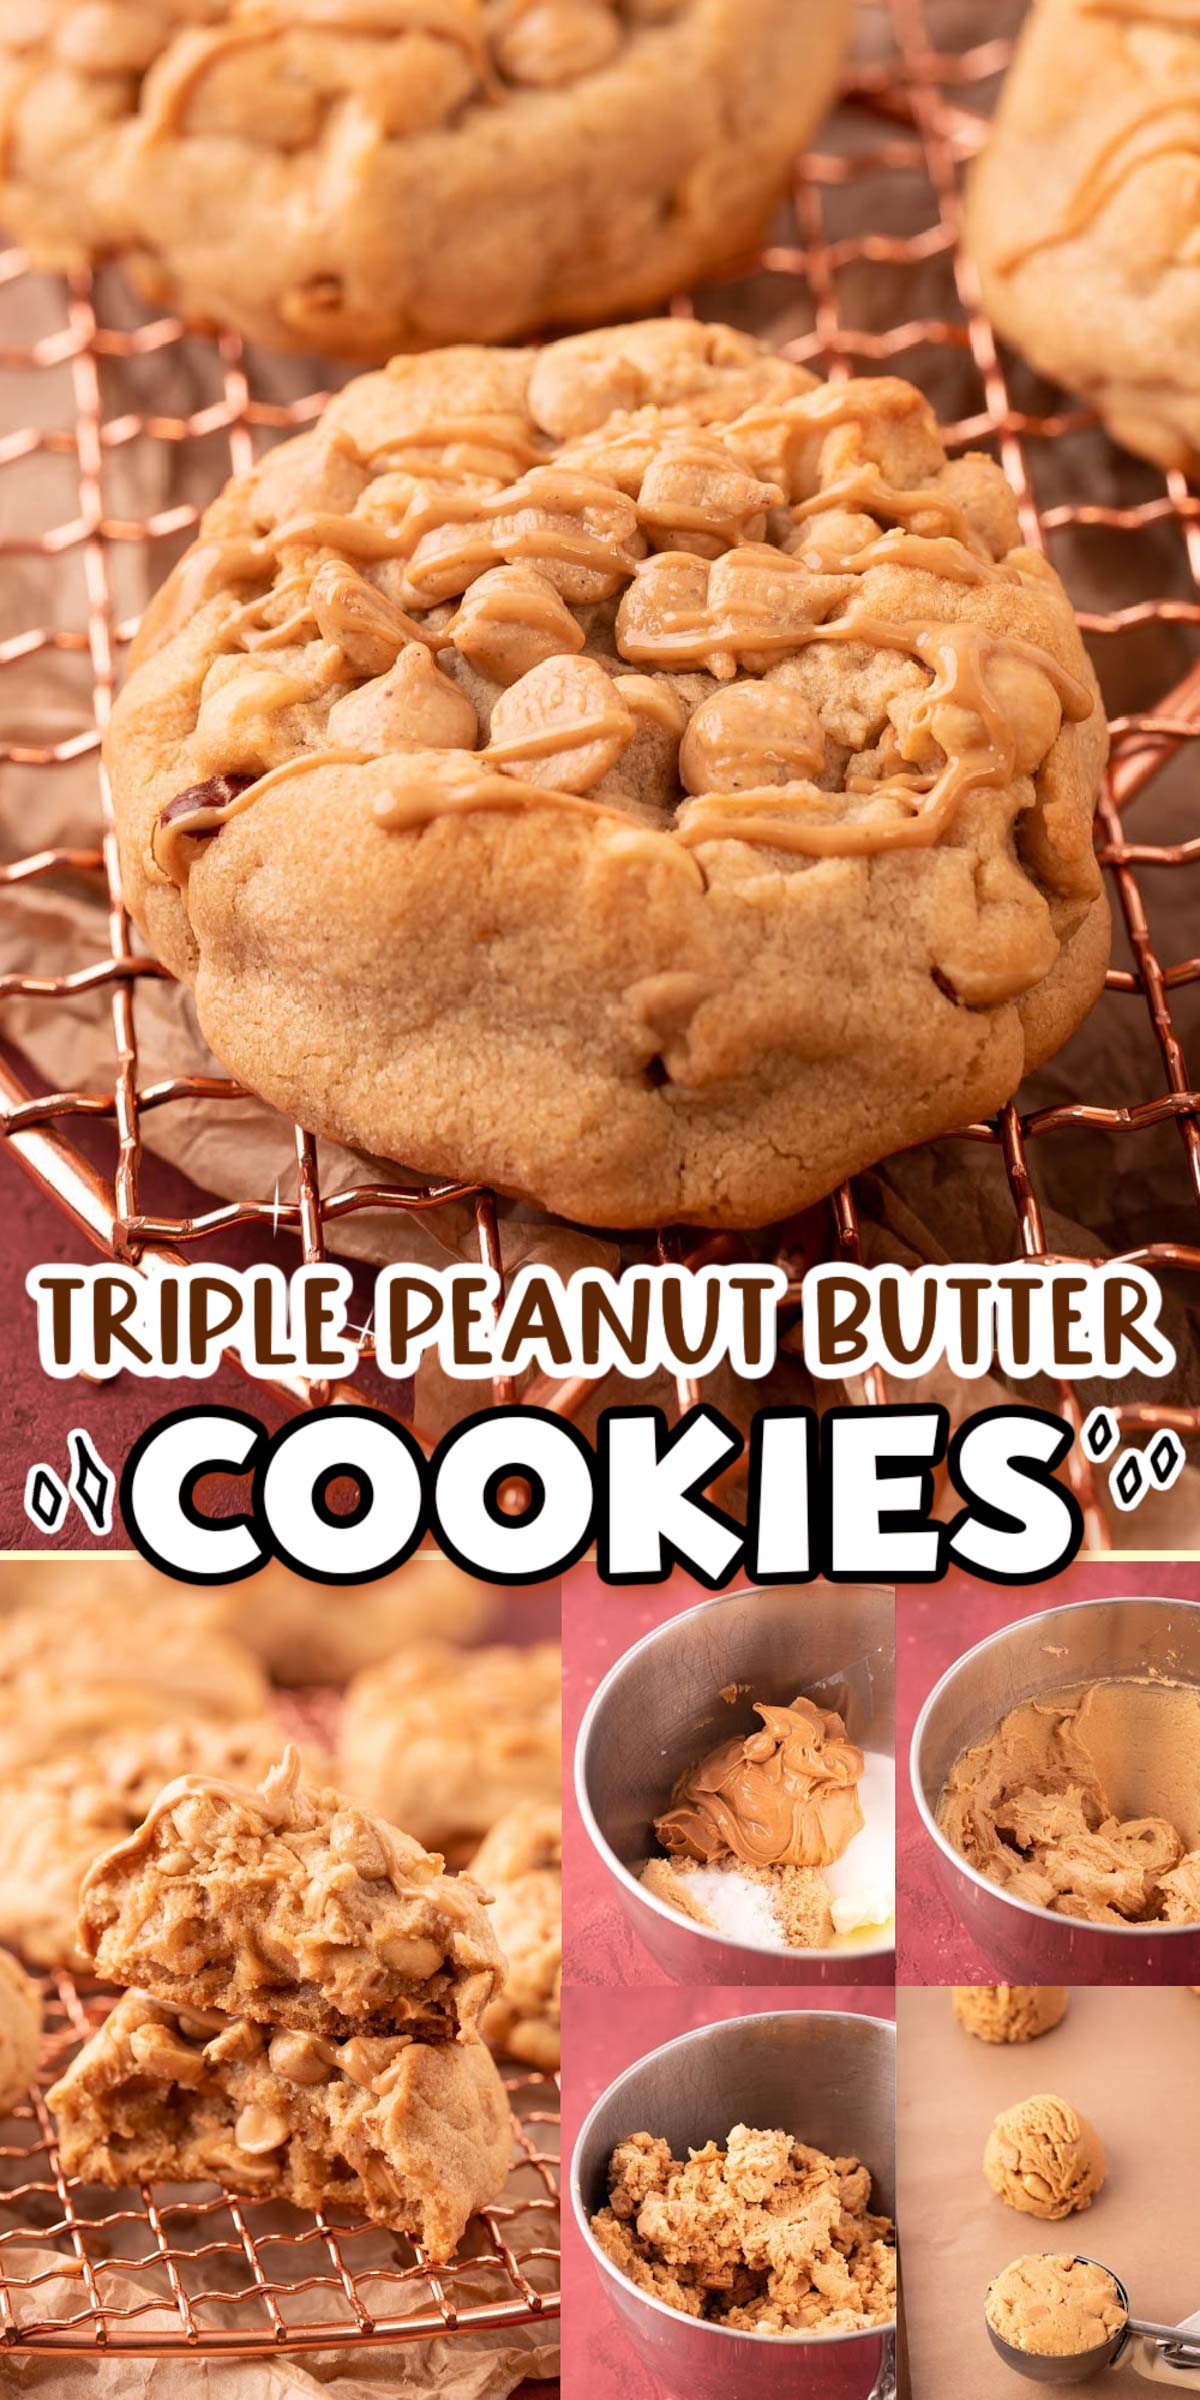 Bakery-Style Triple Peanut Butter Cookies are loaded with creamy peanut butter, crunchy roasted peanuts, and sweet Reese's Peanut Butter Chips! via @sugarandsoulco